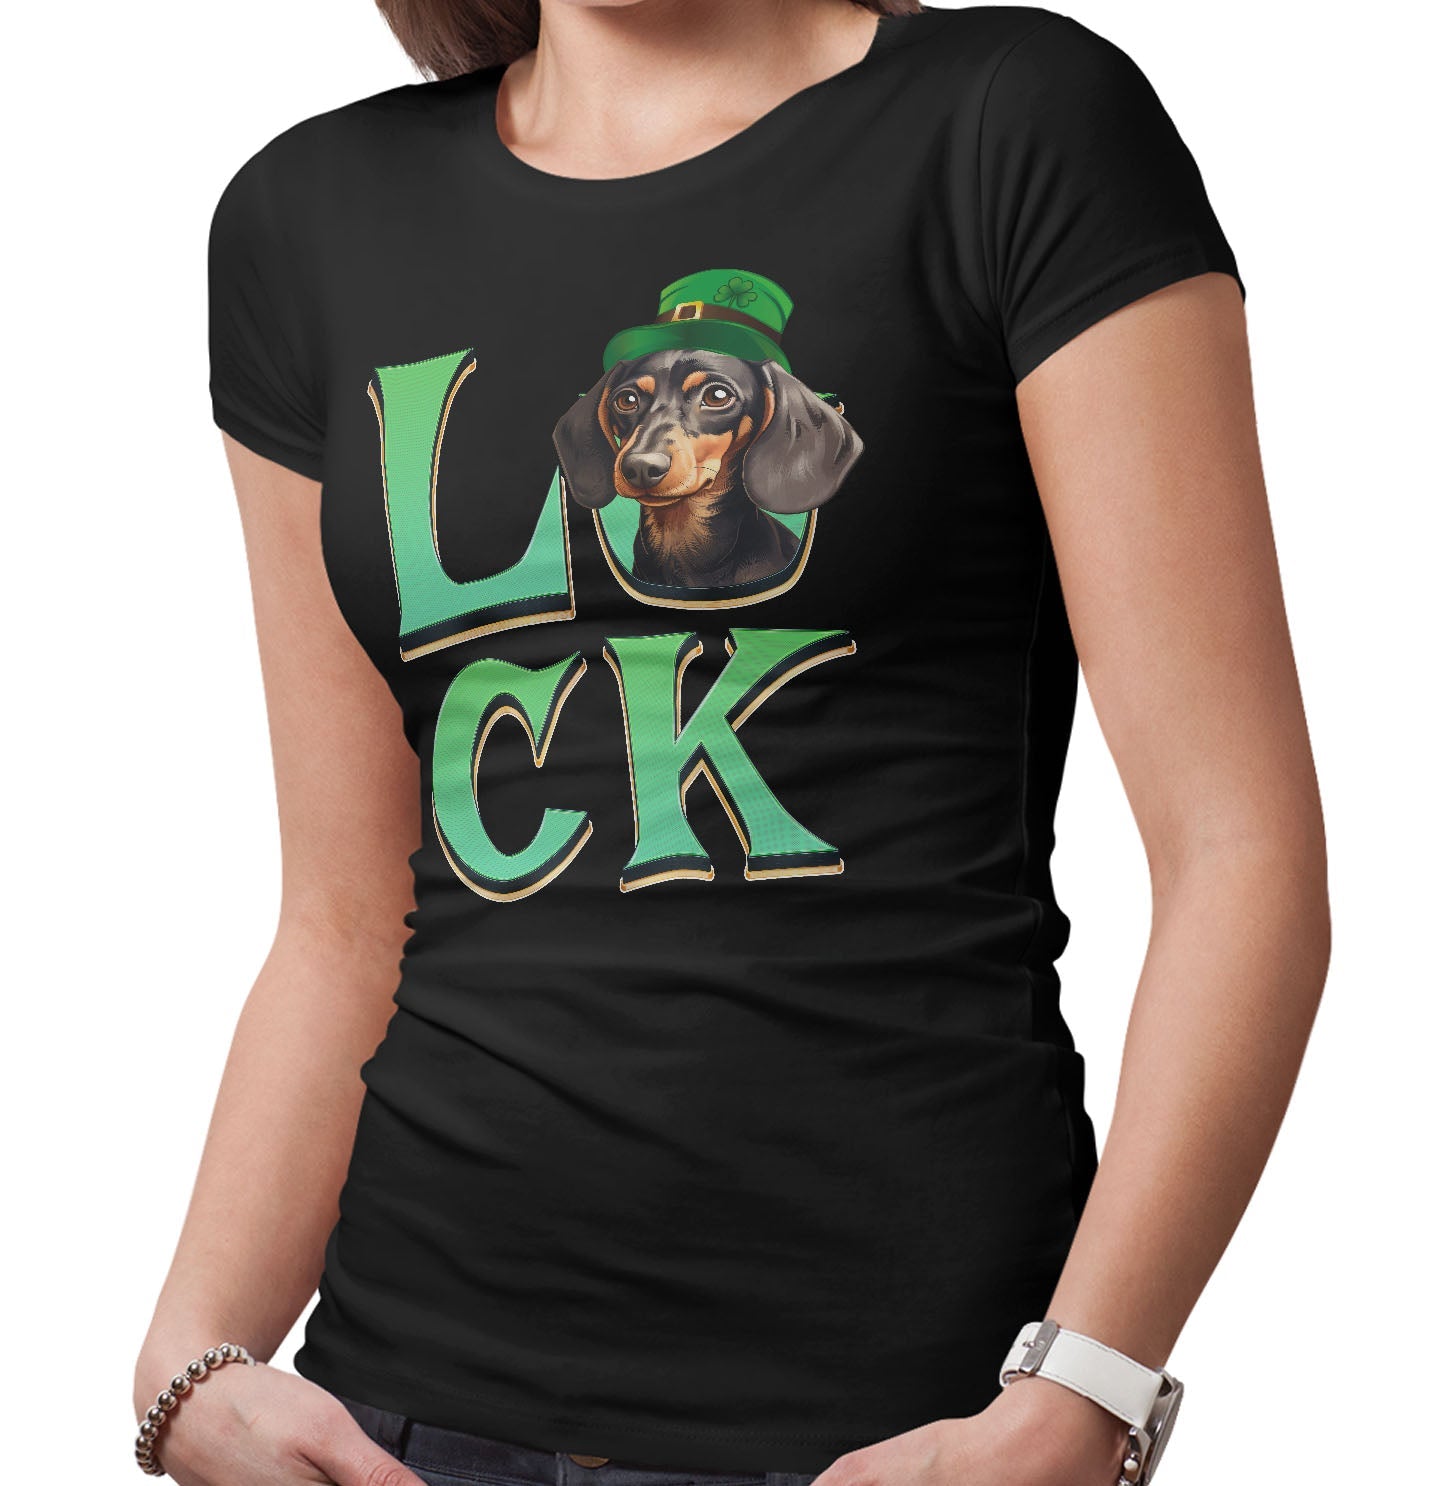 Big LUCK St. Patrick's Day Dachshund - Women's Fitted T-Shirt